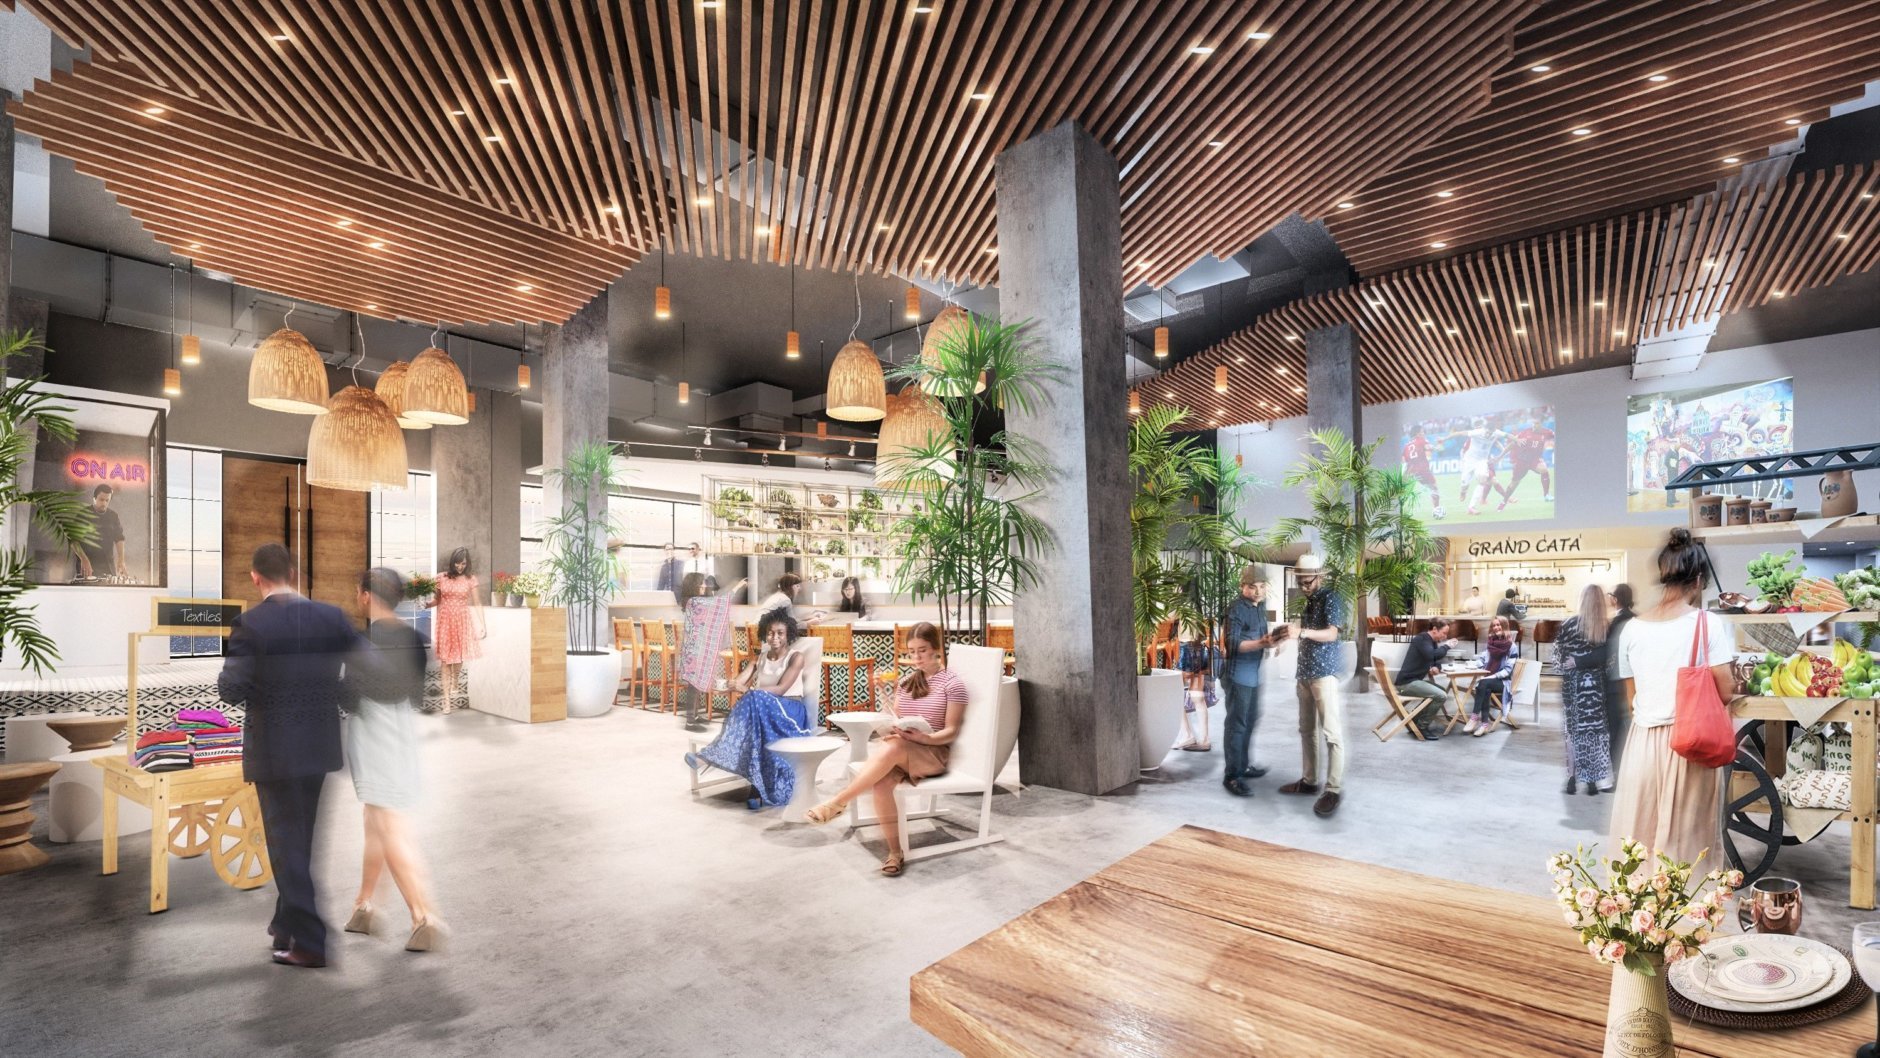 The market will also include private event space, cooking demonstrations, language classes, workshops, art exhibitions and pop-up vendors and events. (Courtesy Edens)